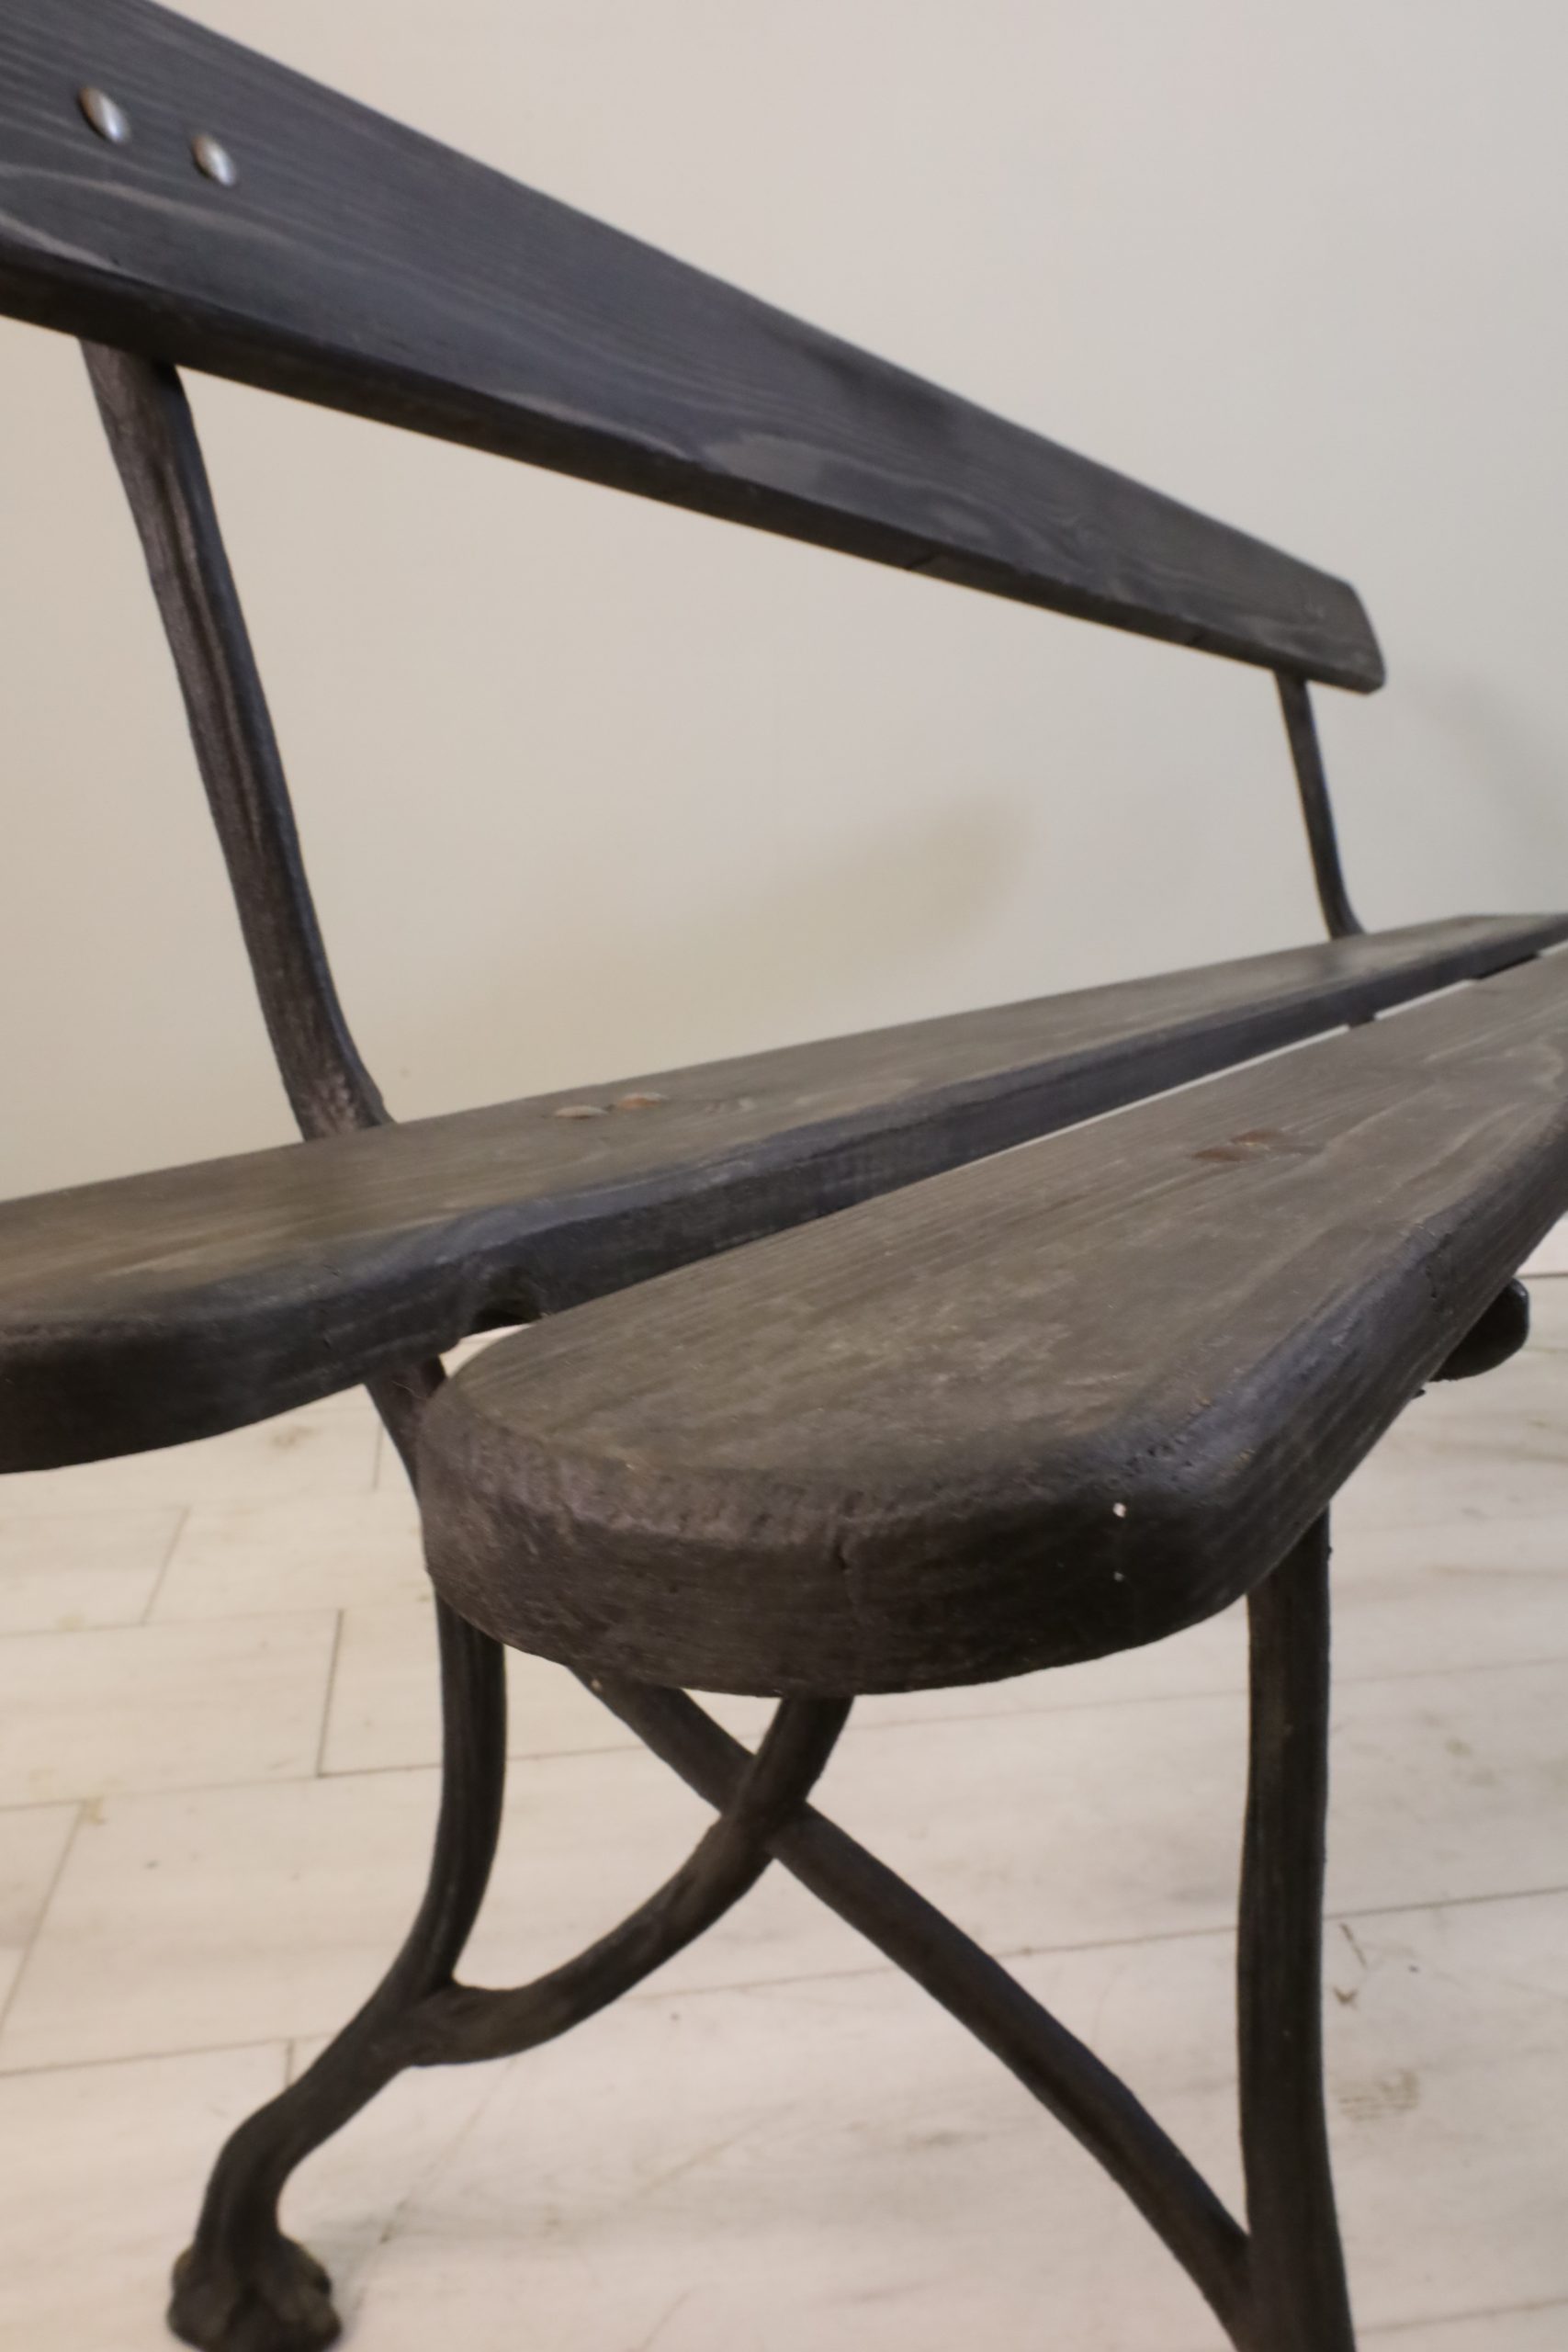 Bench with cast iron legs - 40s